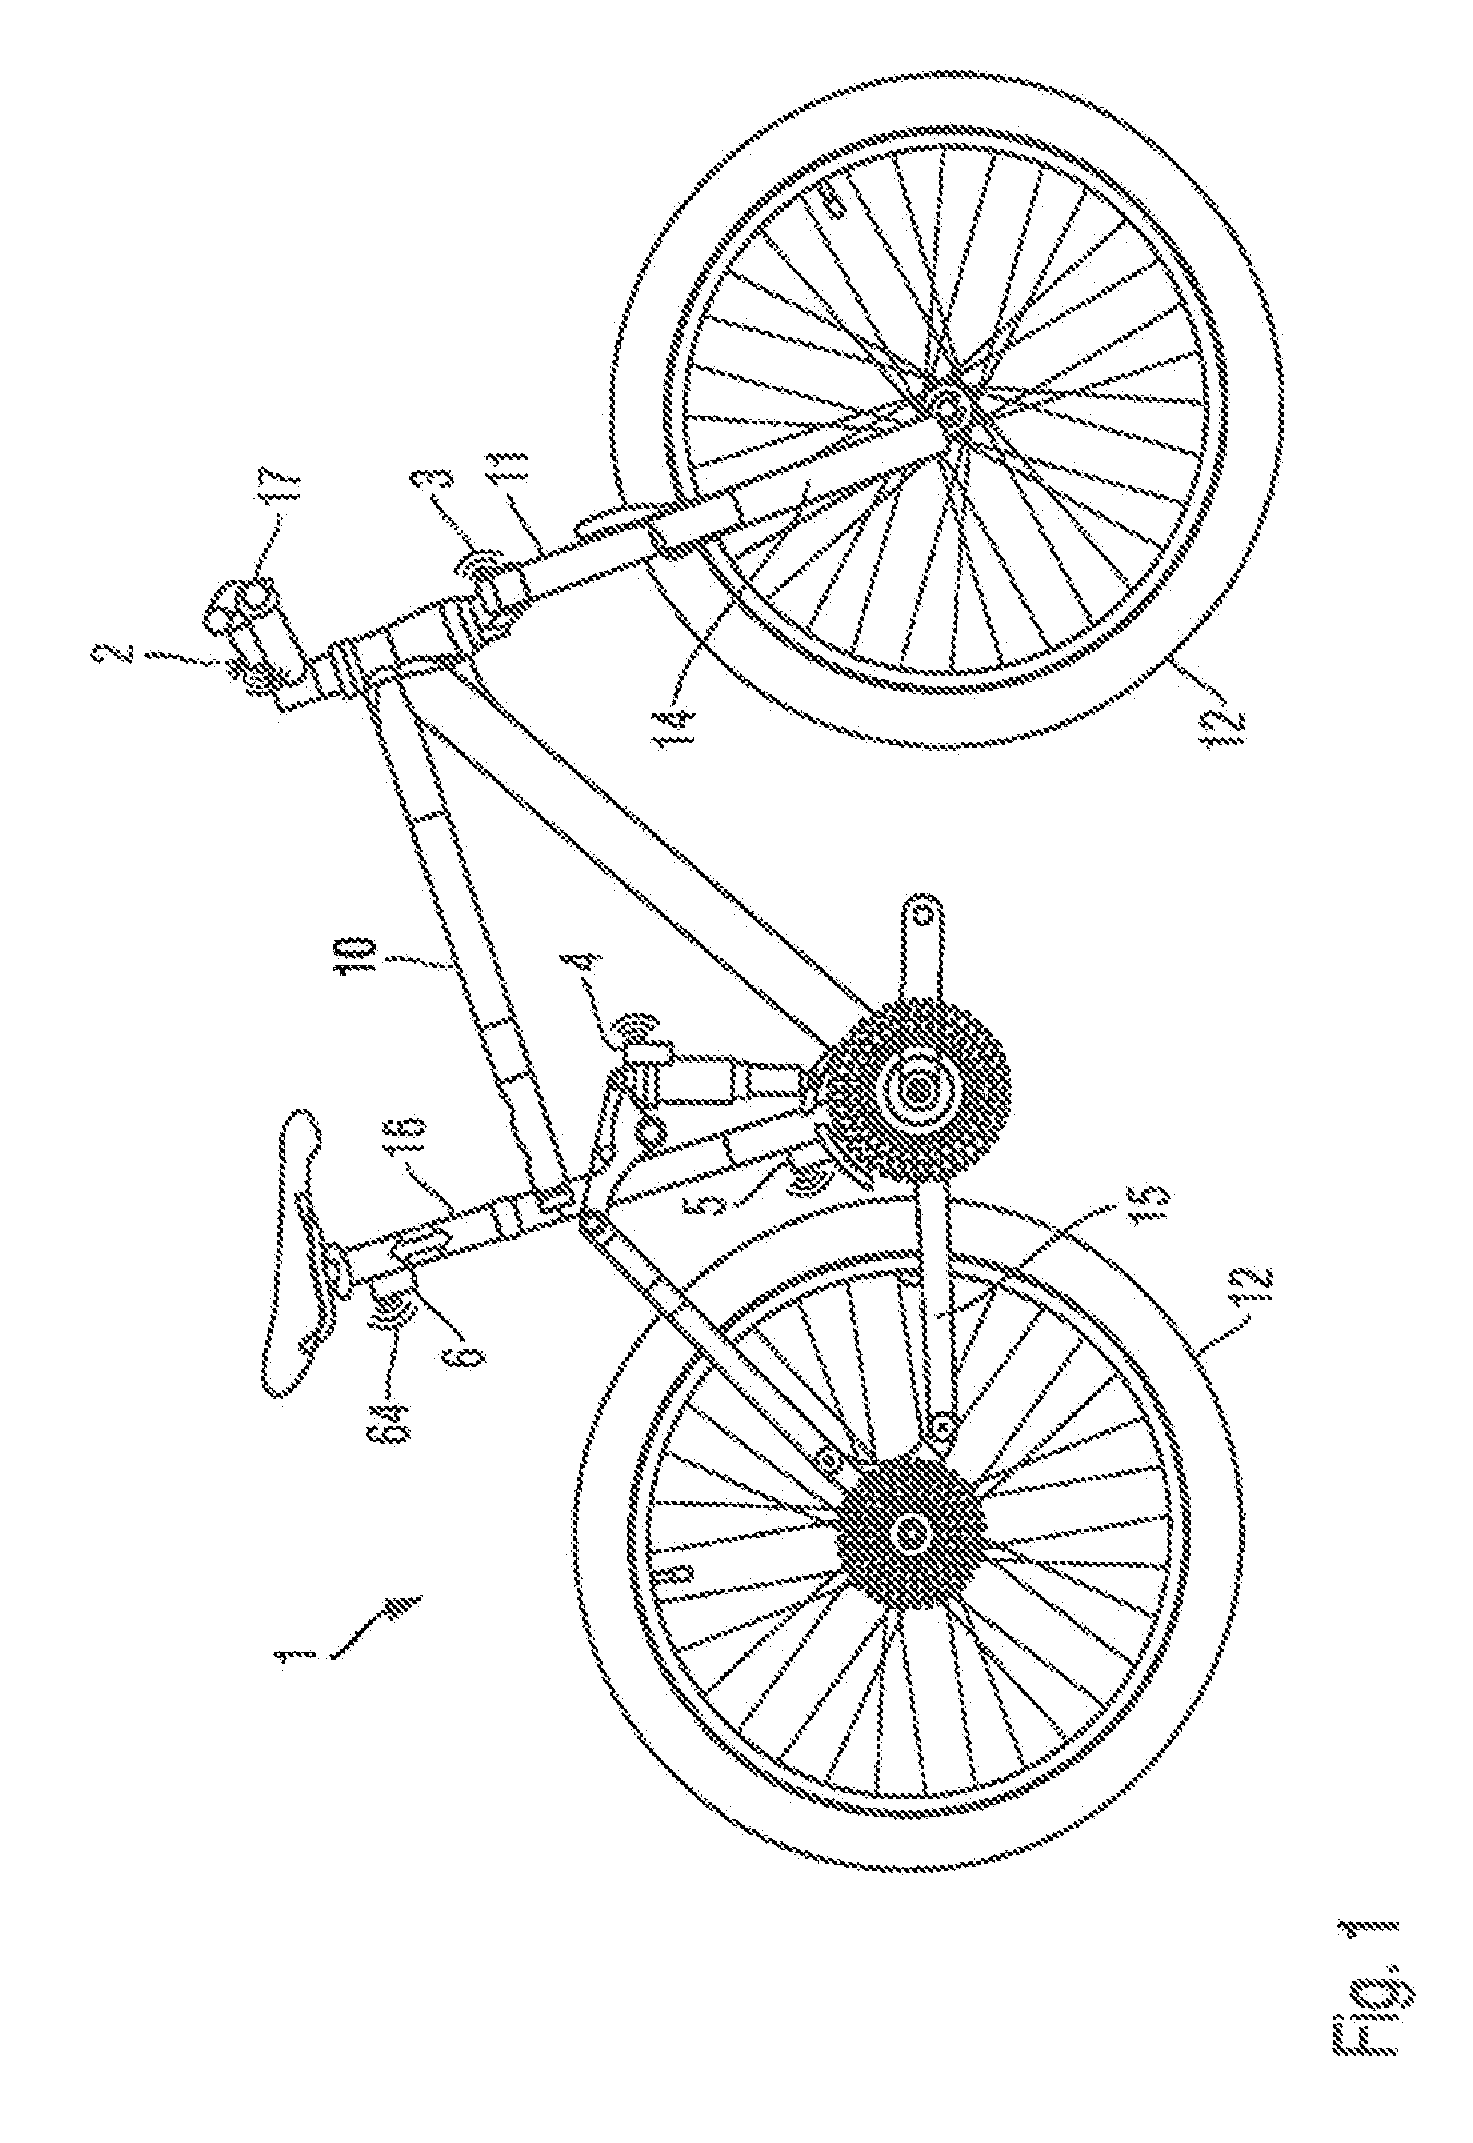 Electronically Controlled Suspension System, Method for Controlling a Suspension System and Computer Program